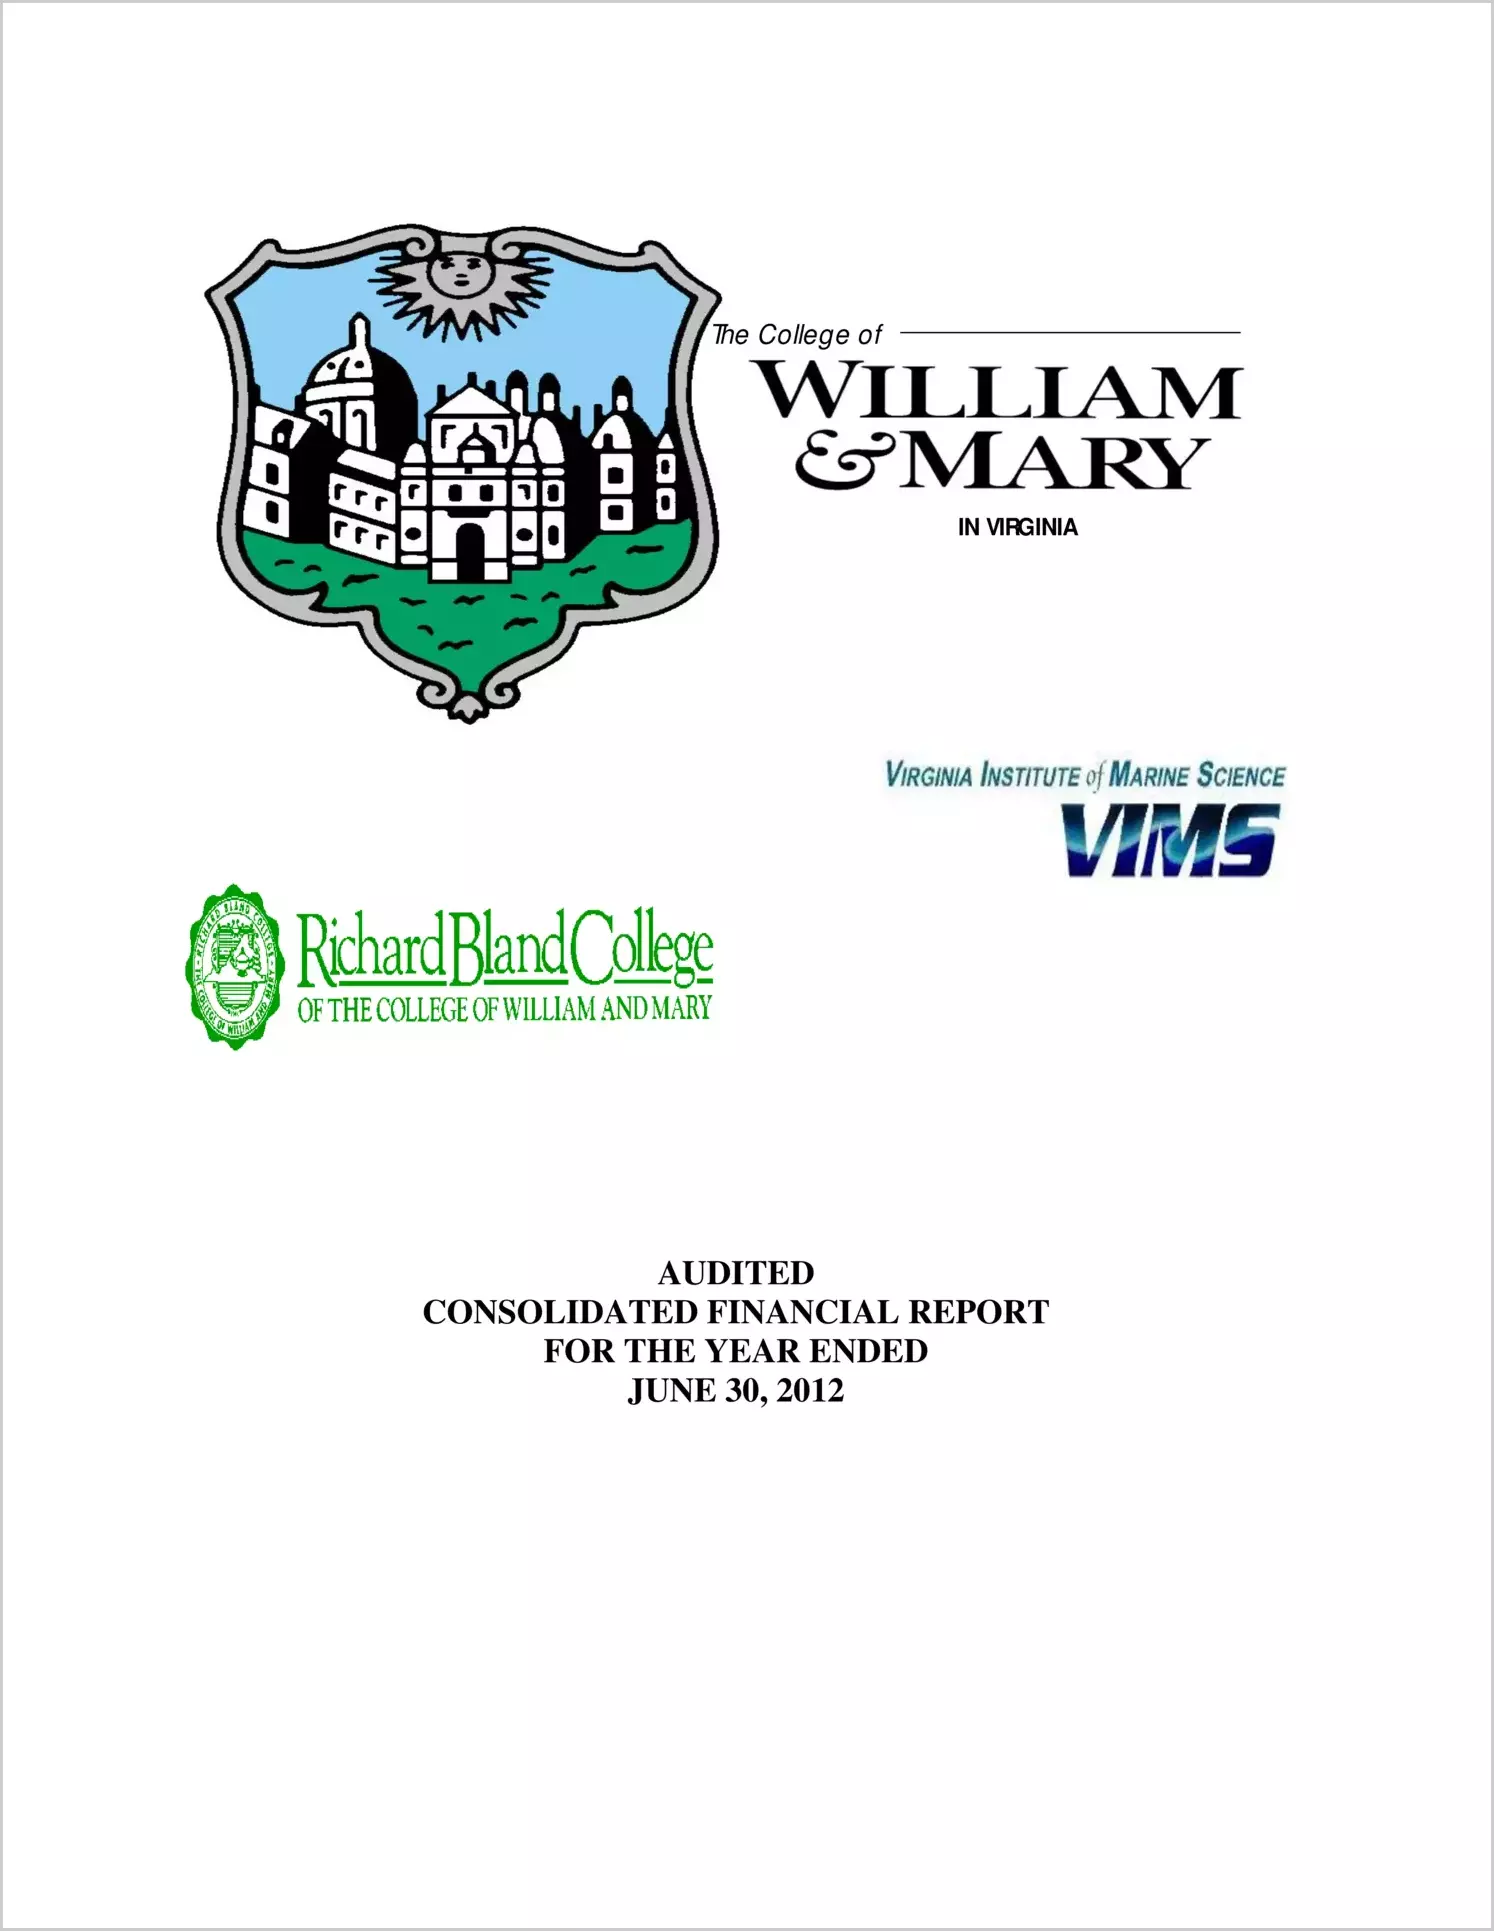 William & Mary, Virginia Institute of Marine Science, and Richard Bland College Financial Statements for the year ended June 30, 2012